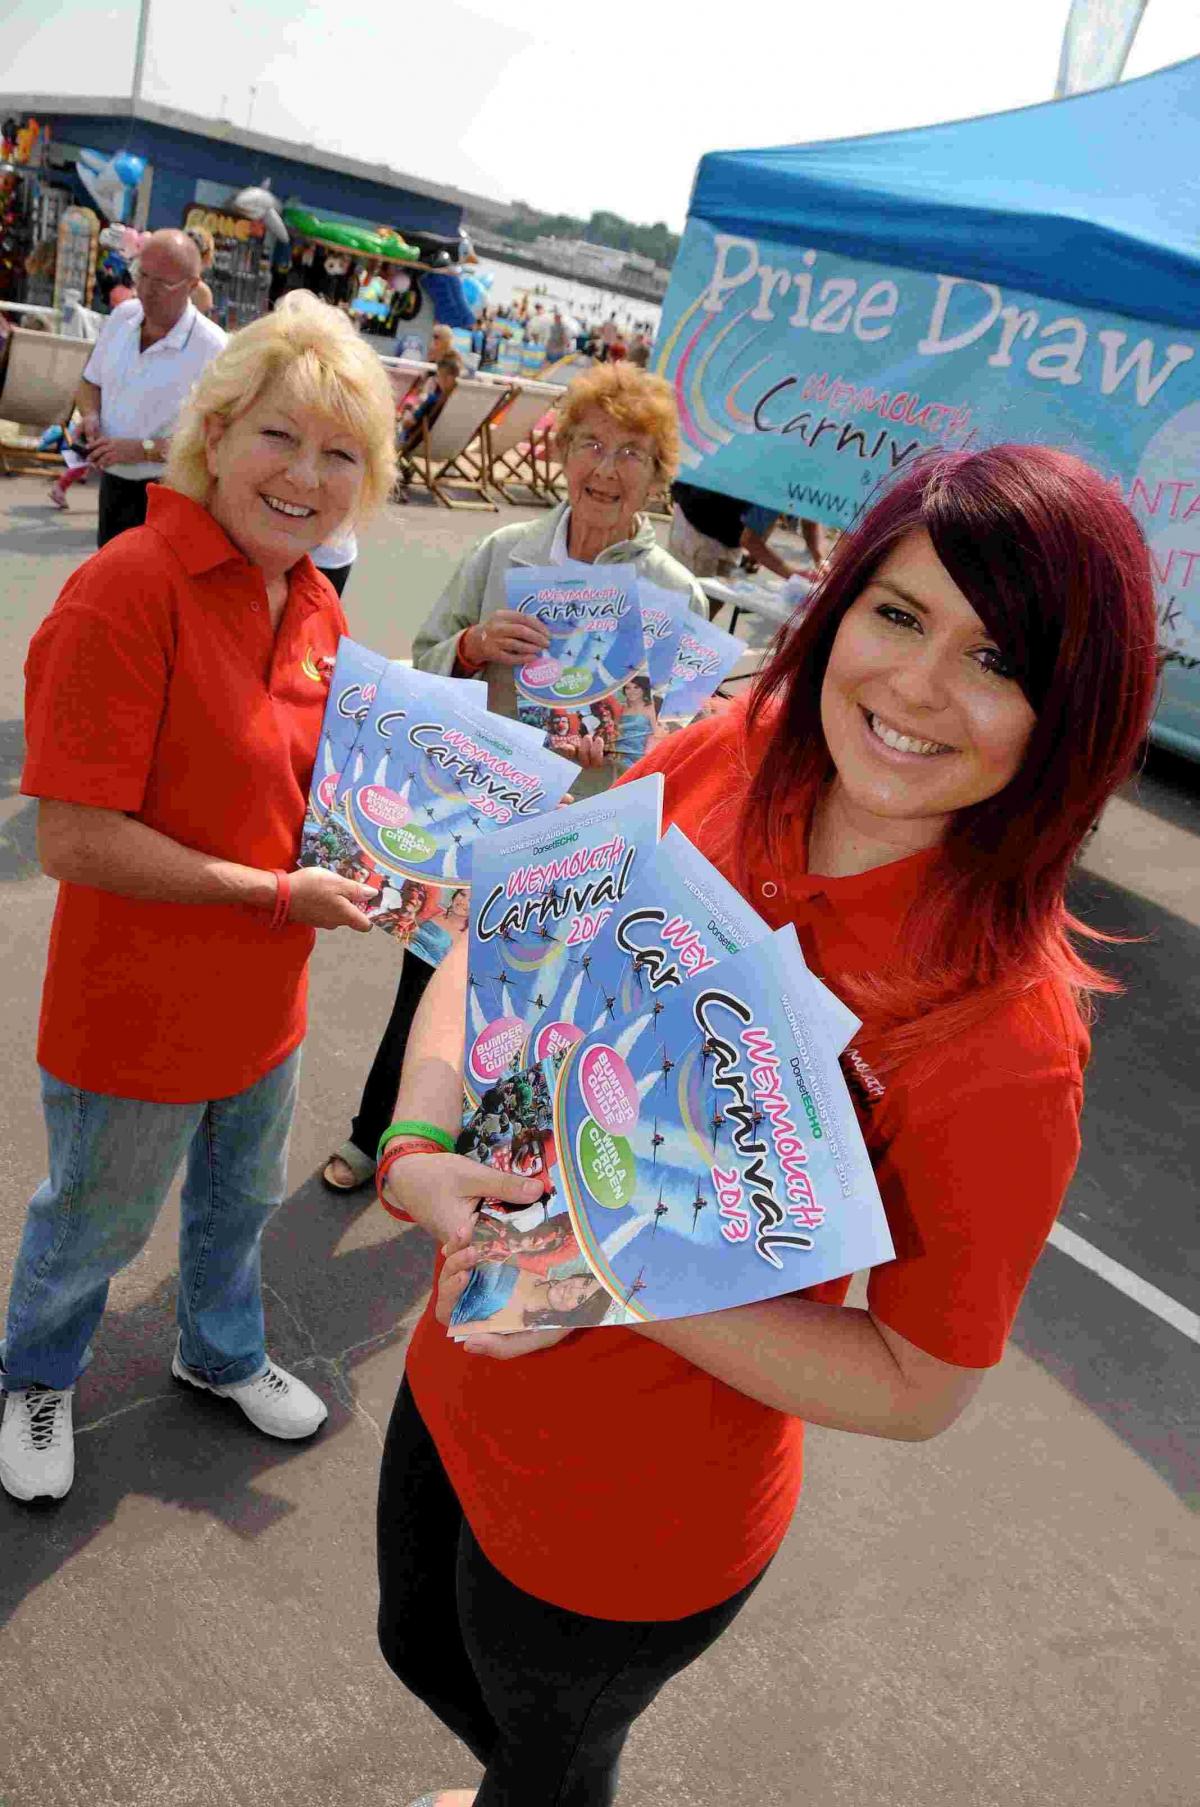 Carnival programmes and raffle tickets are on sale